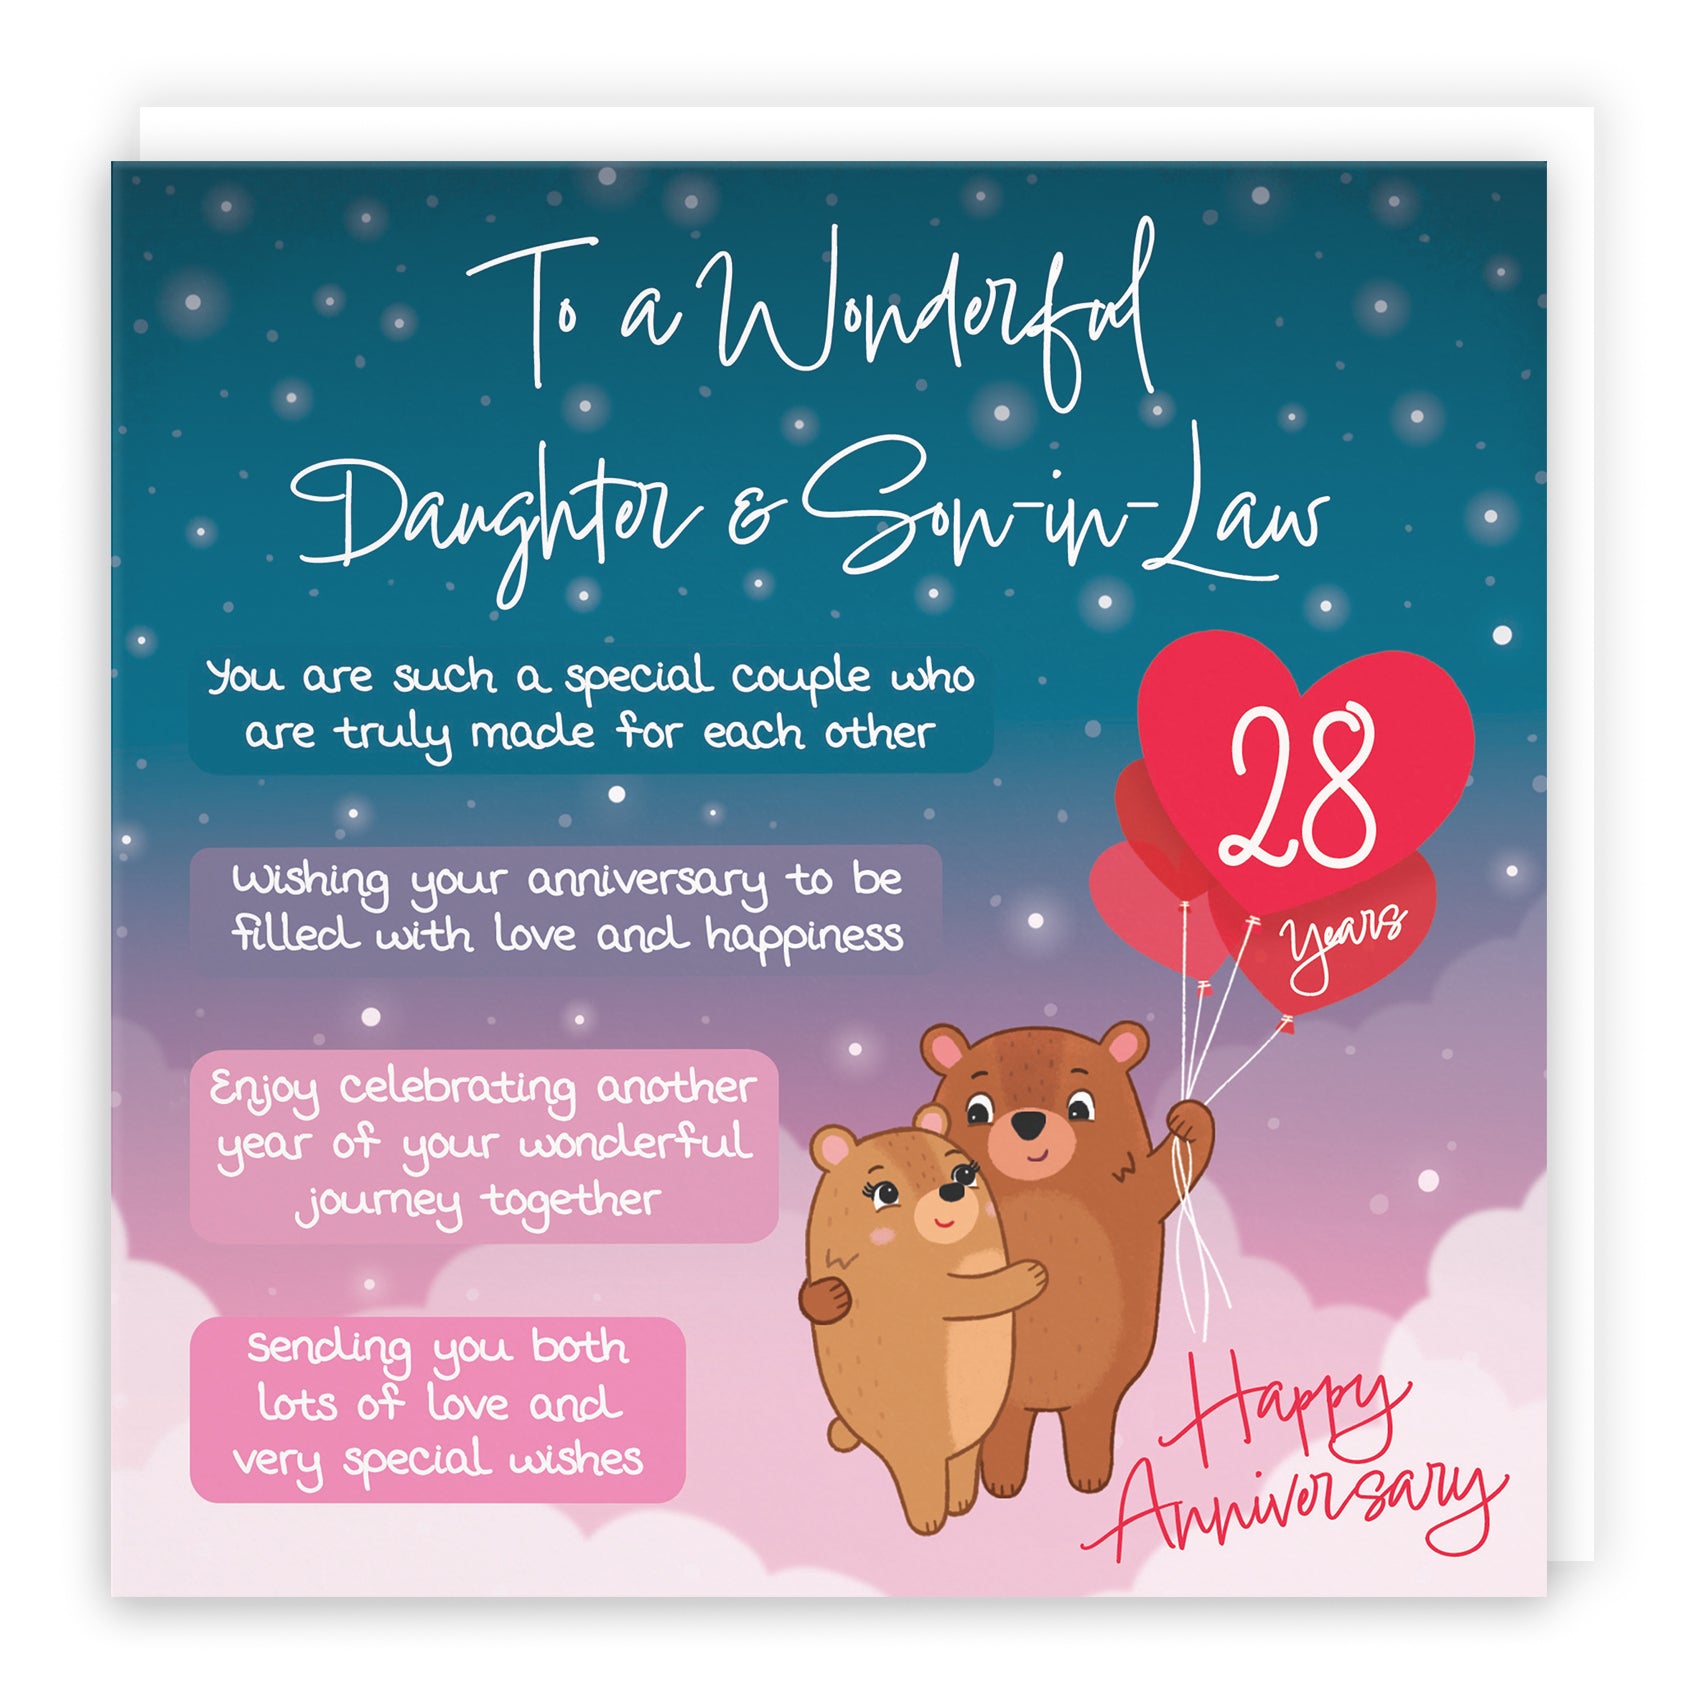 Daughter And Son In Law 28th Anniversary Card Starry Night Cute Bears